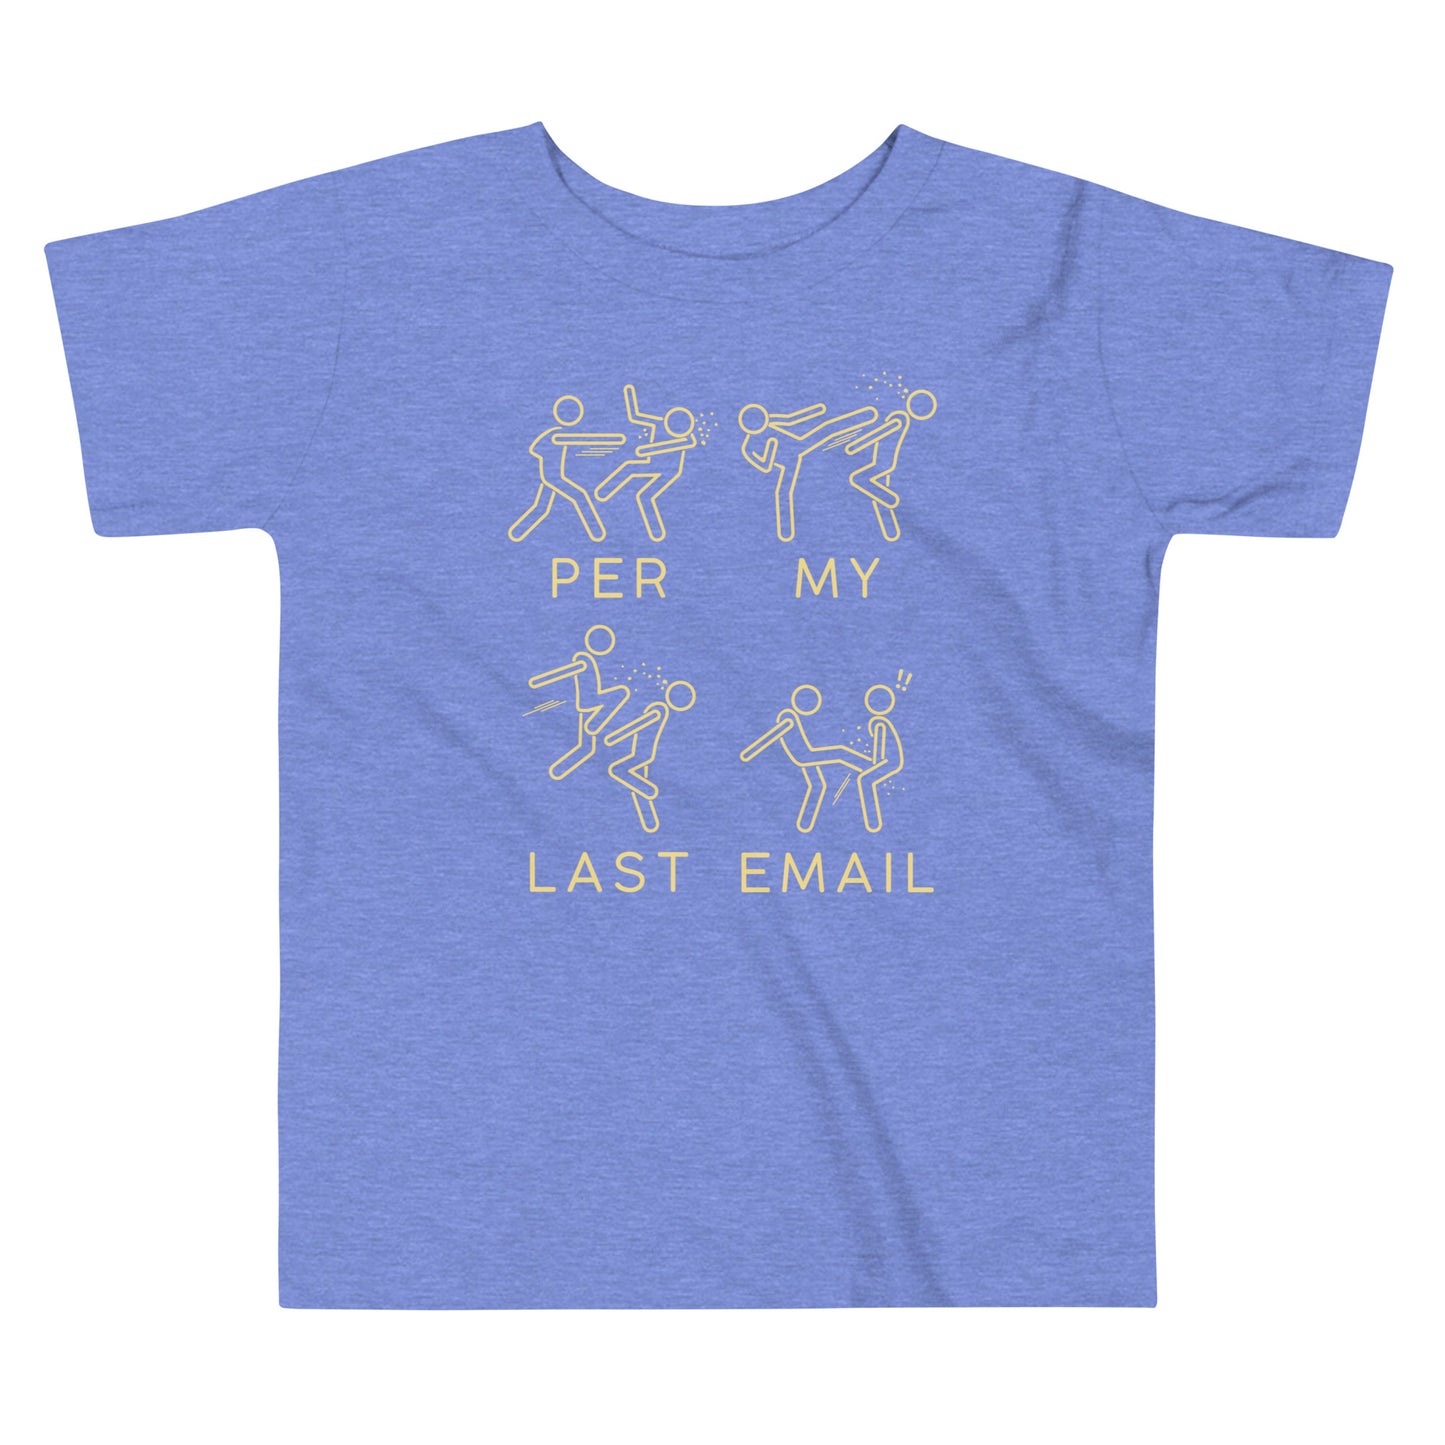 Per My Last Email Kid's Toddler Tee